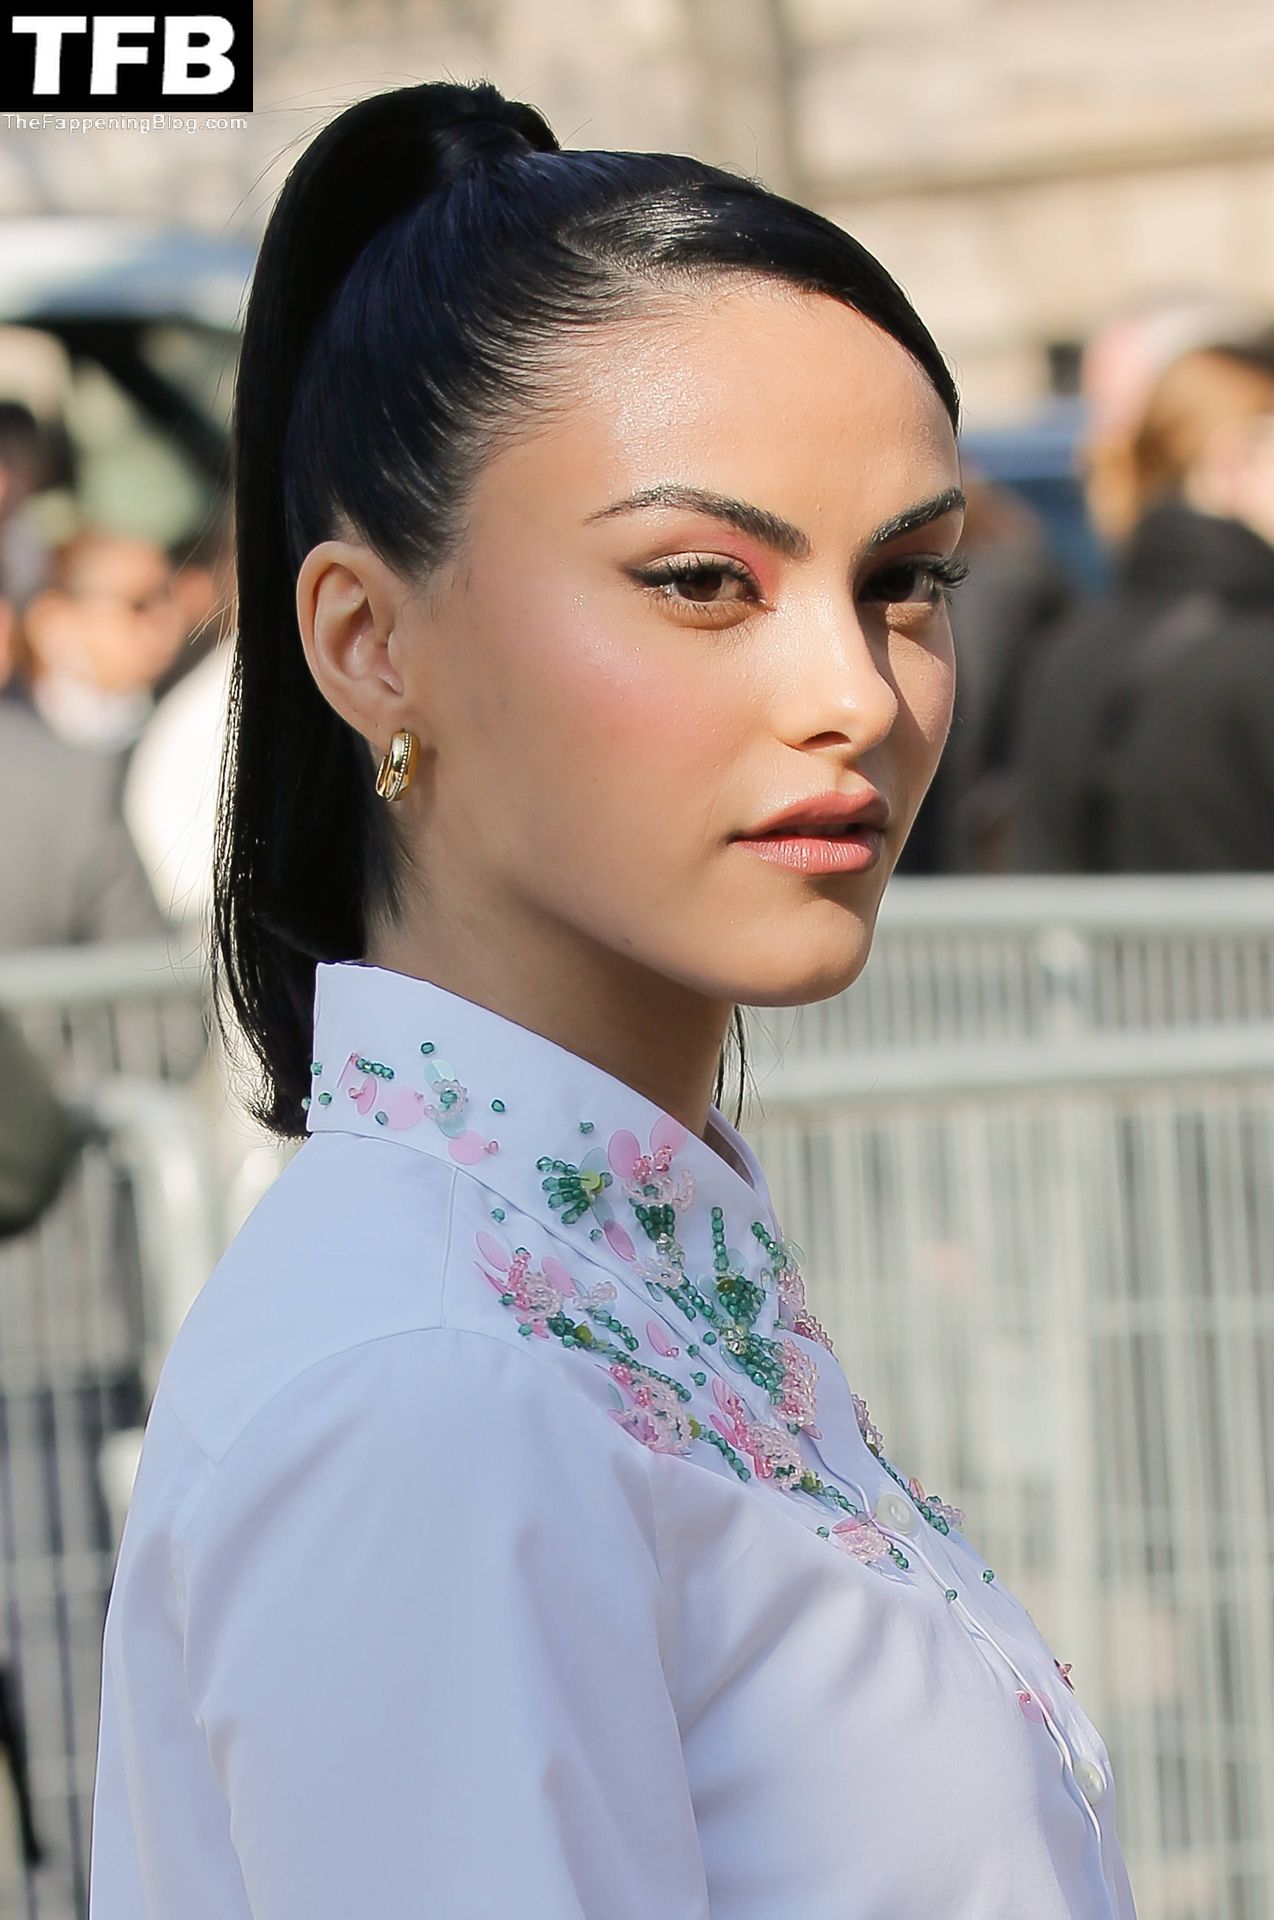 Camila-Mendes-Sexy-The-Fappening-Blog-24.jpg